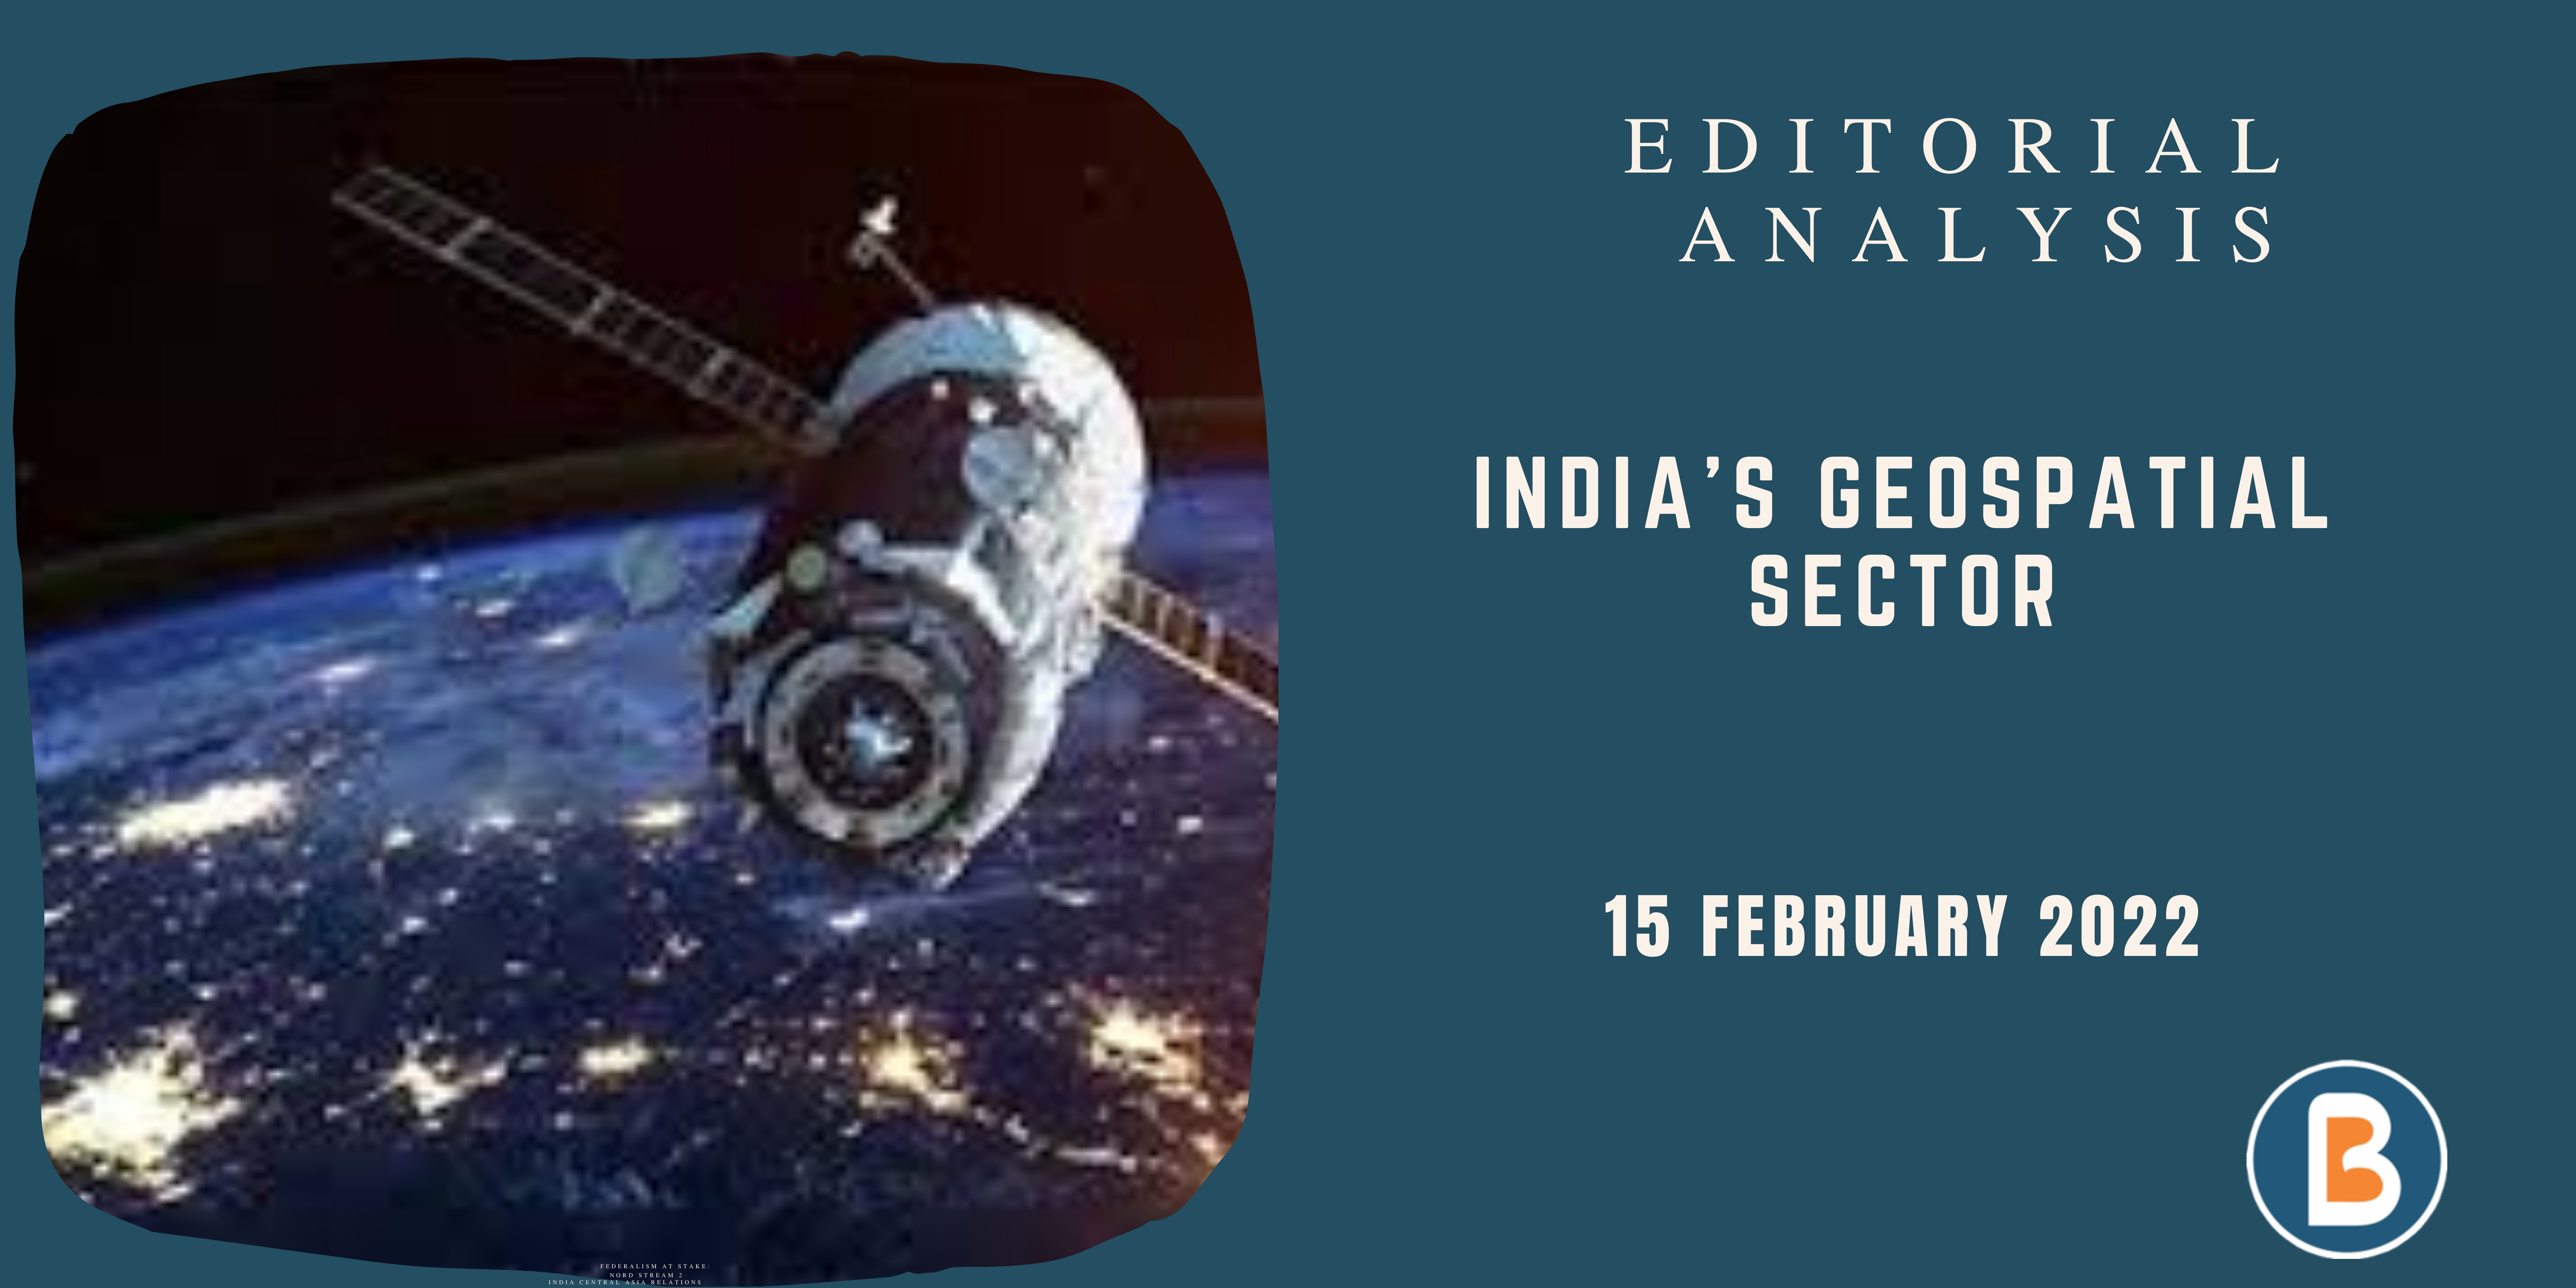 Editorial Analysis for UPSC - India's Geospatial Sector